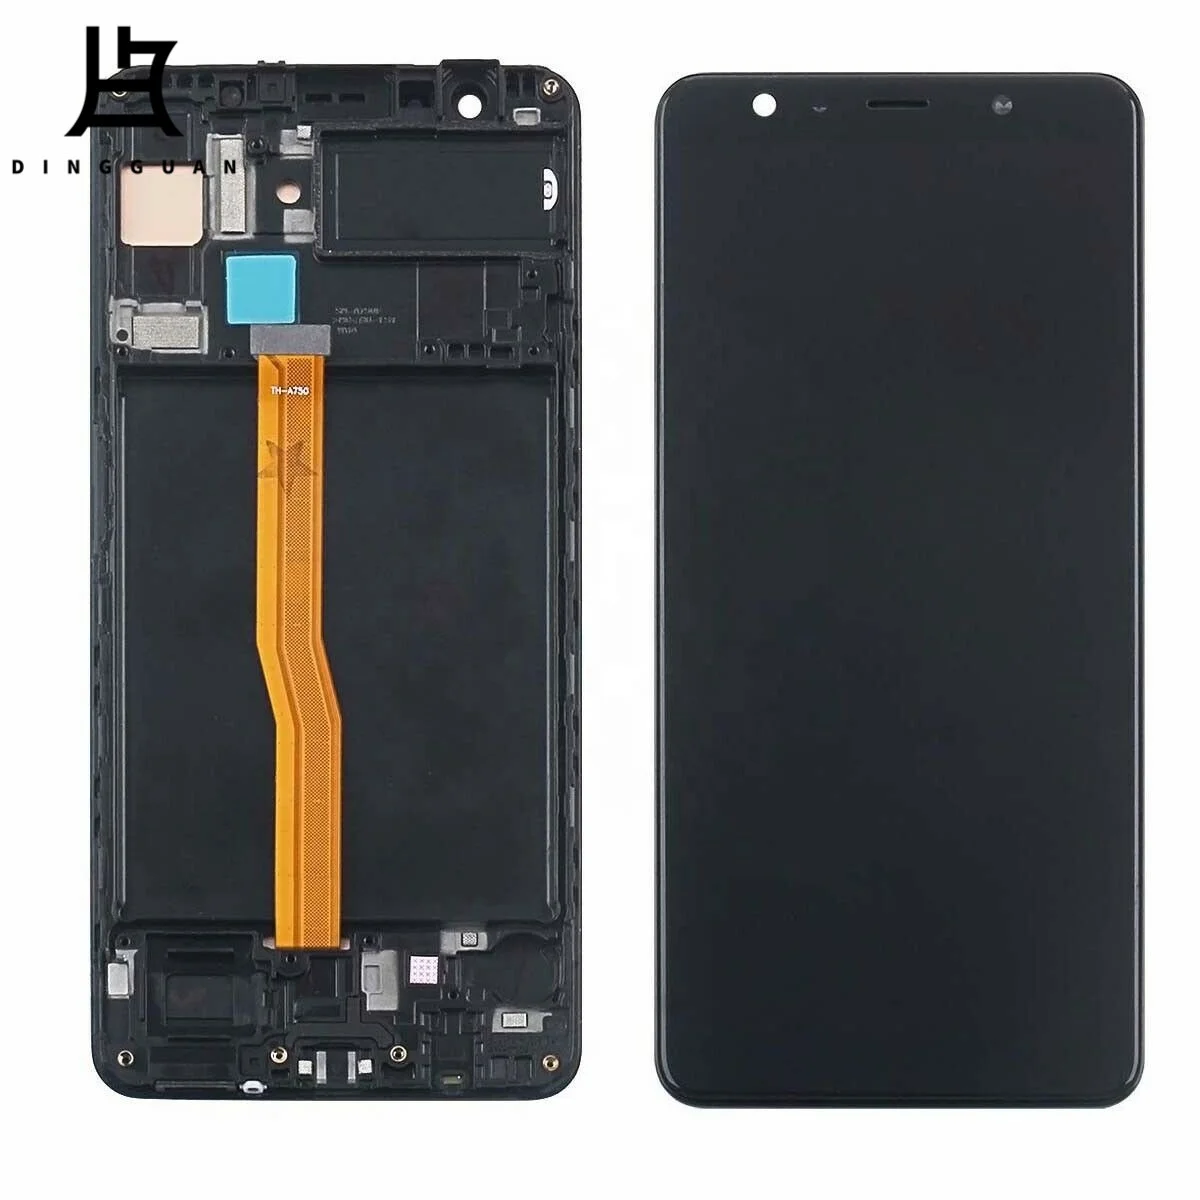 

Replacement mobile phone screen For Samsung Galaxy A7 A750 2018 LCD Screen Touch Digitizer with frame Assembly, Black